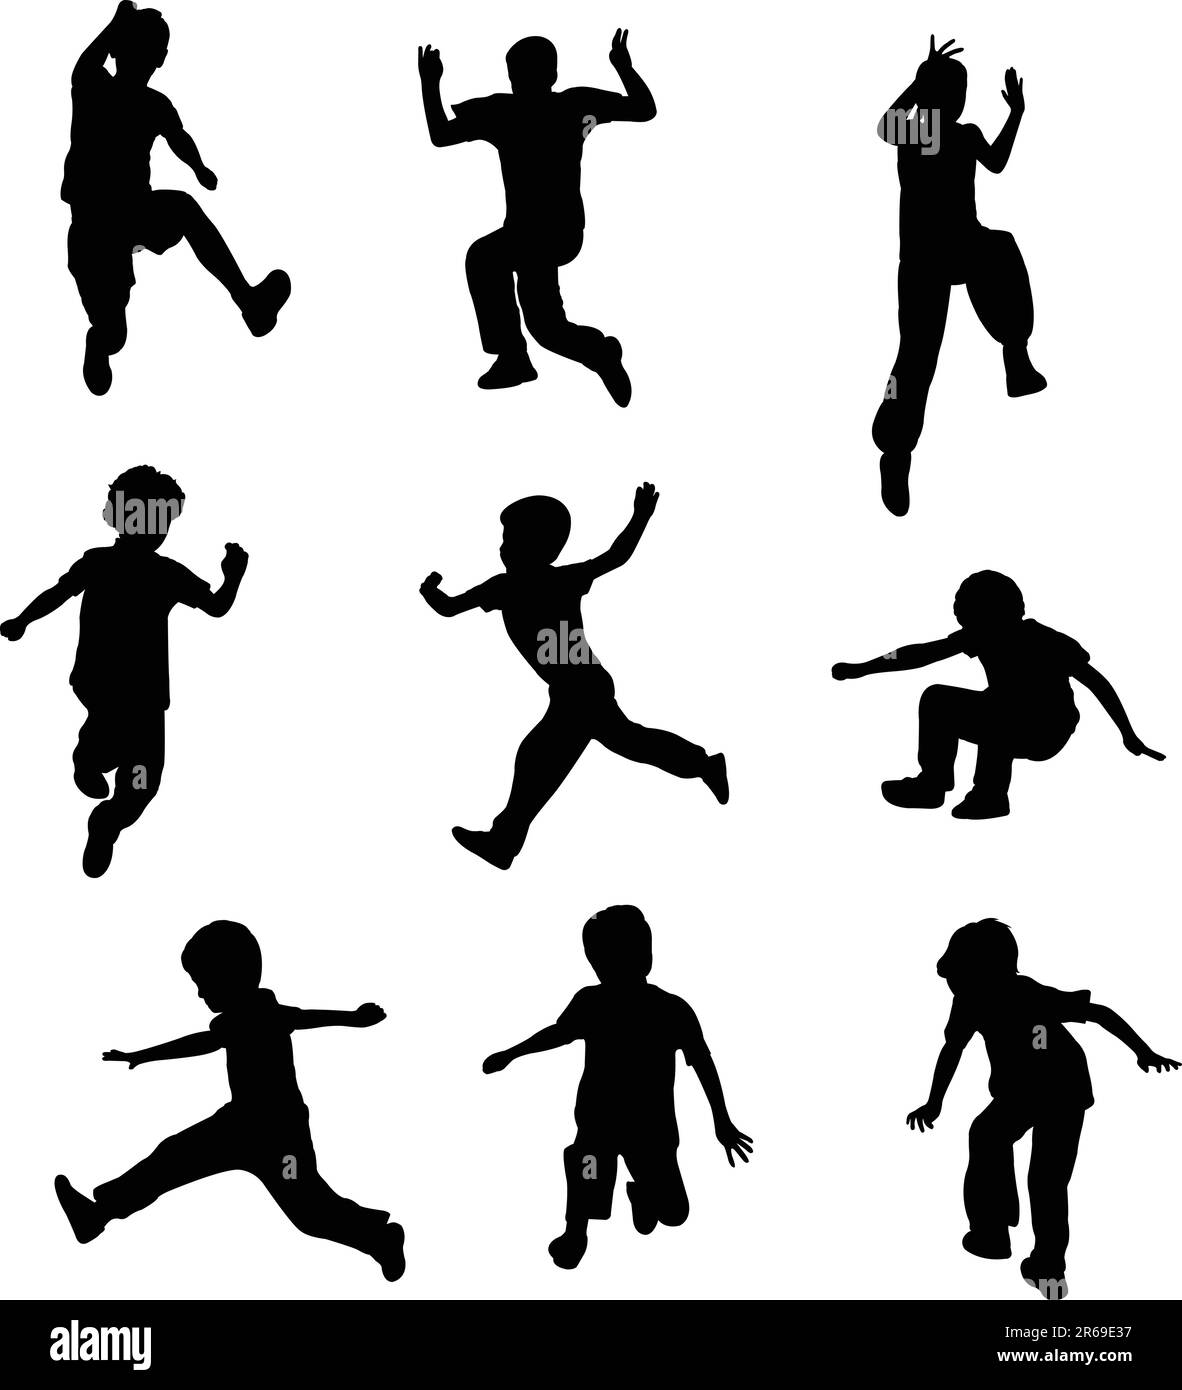 silhouettes of children jumping - vector Stock Vector